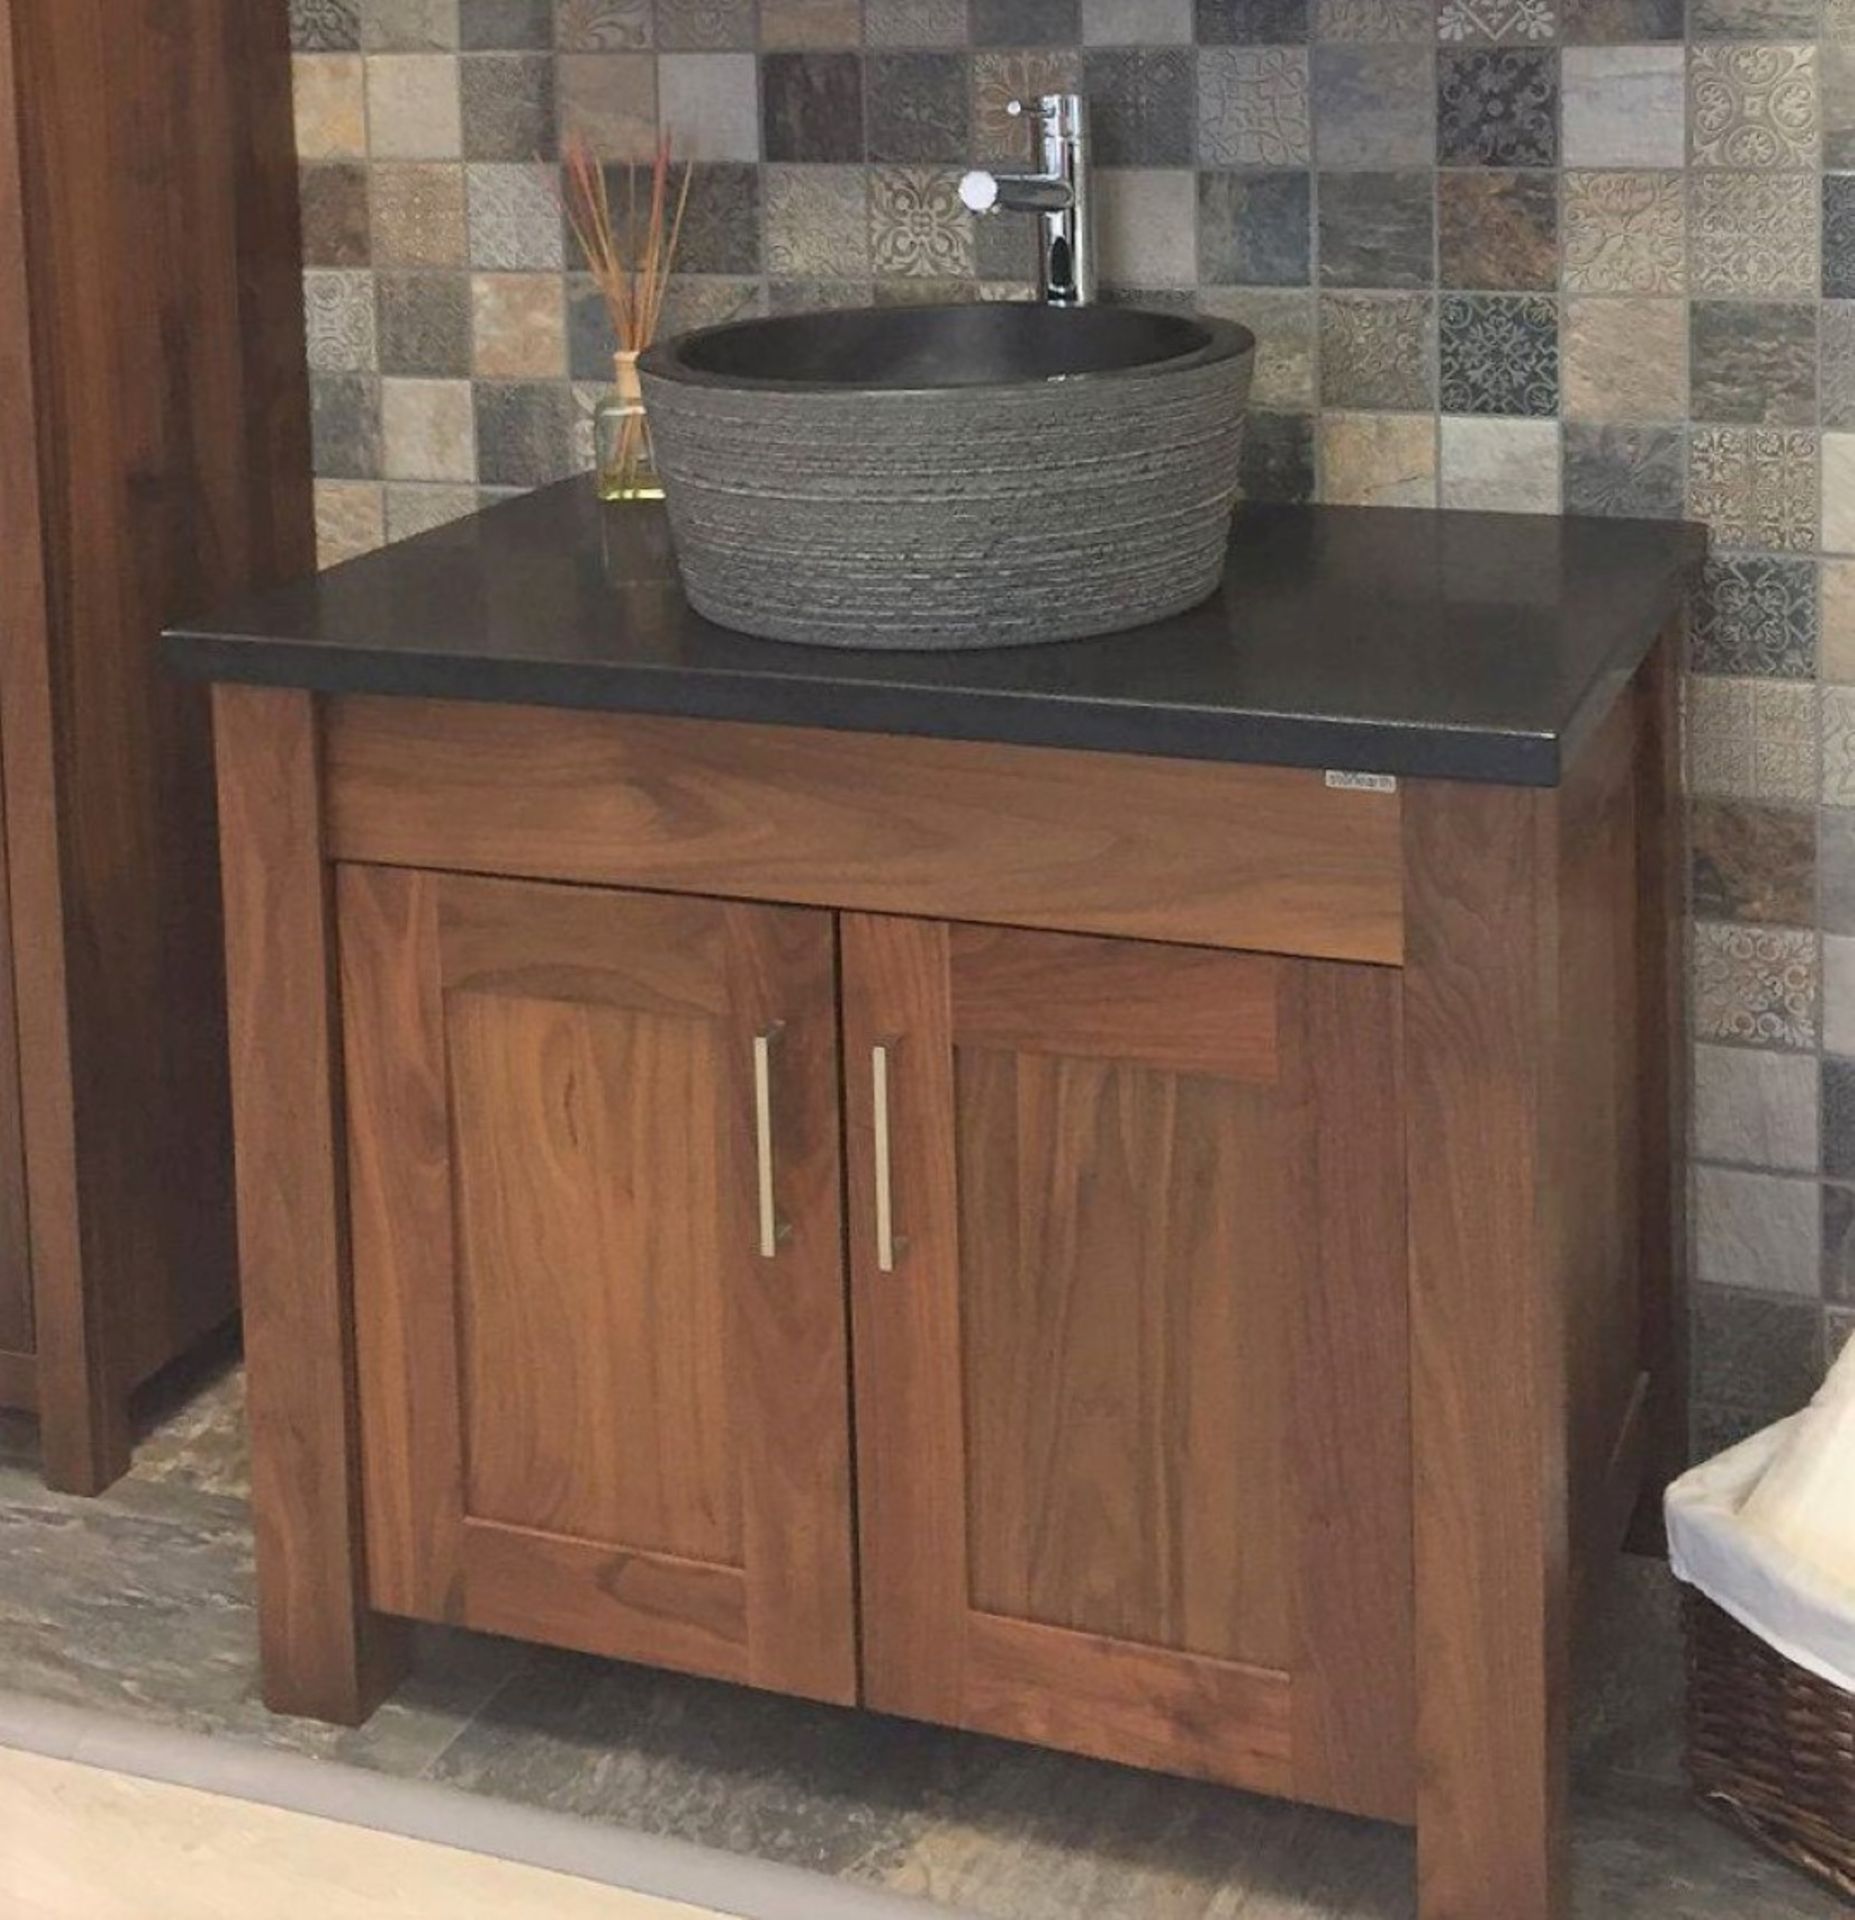 1 x Stonearth 'Finesse' Countertop Washstand - American Solid Walnut - Original RRP £1,400 - Image 2 of 10